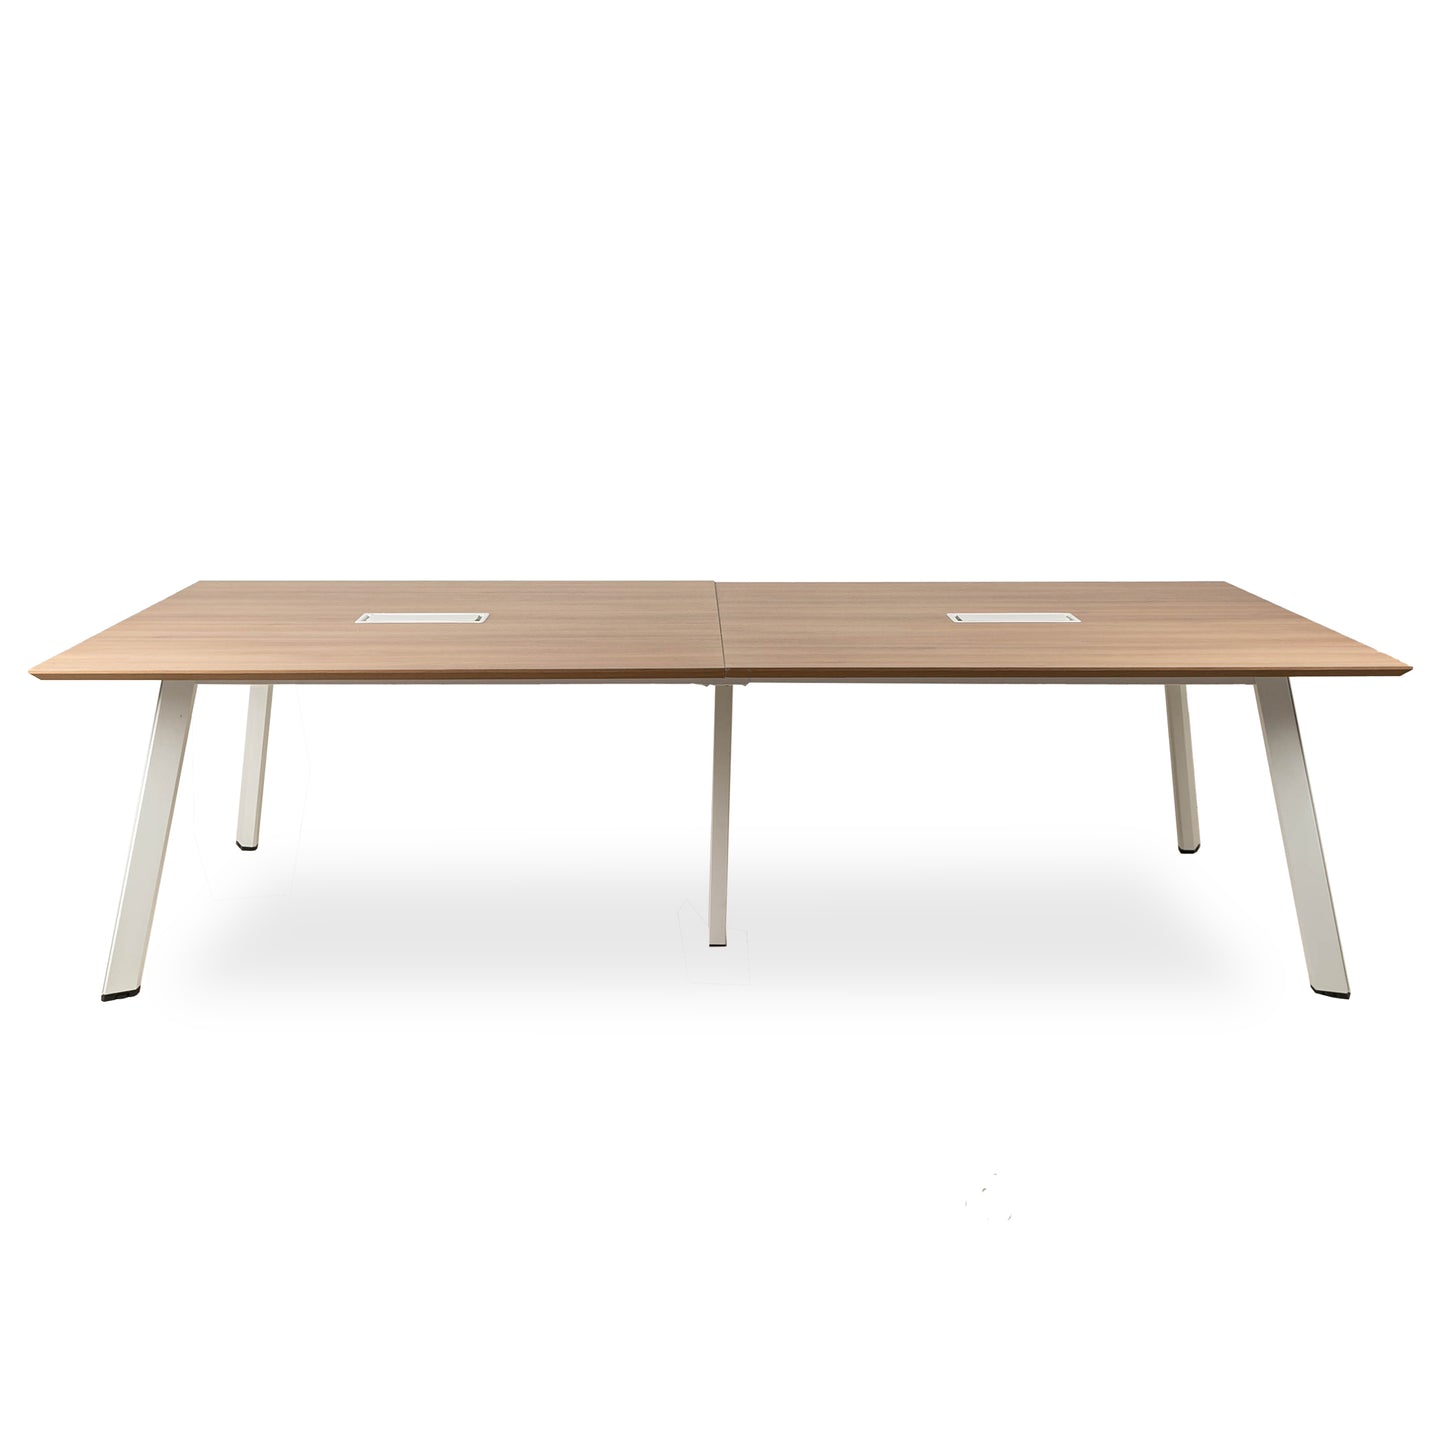 A28 MEETING TABLE - ContractWorld Furniture